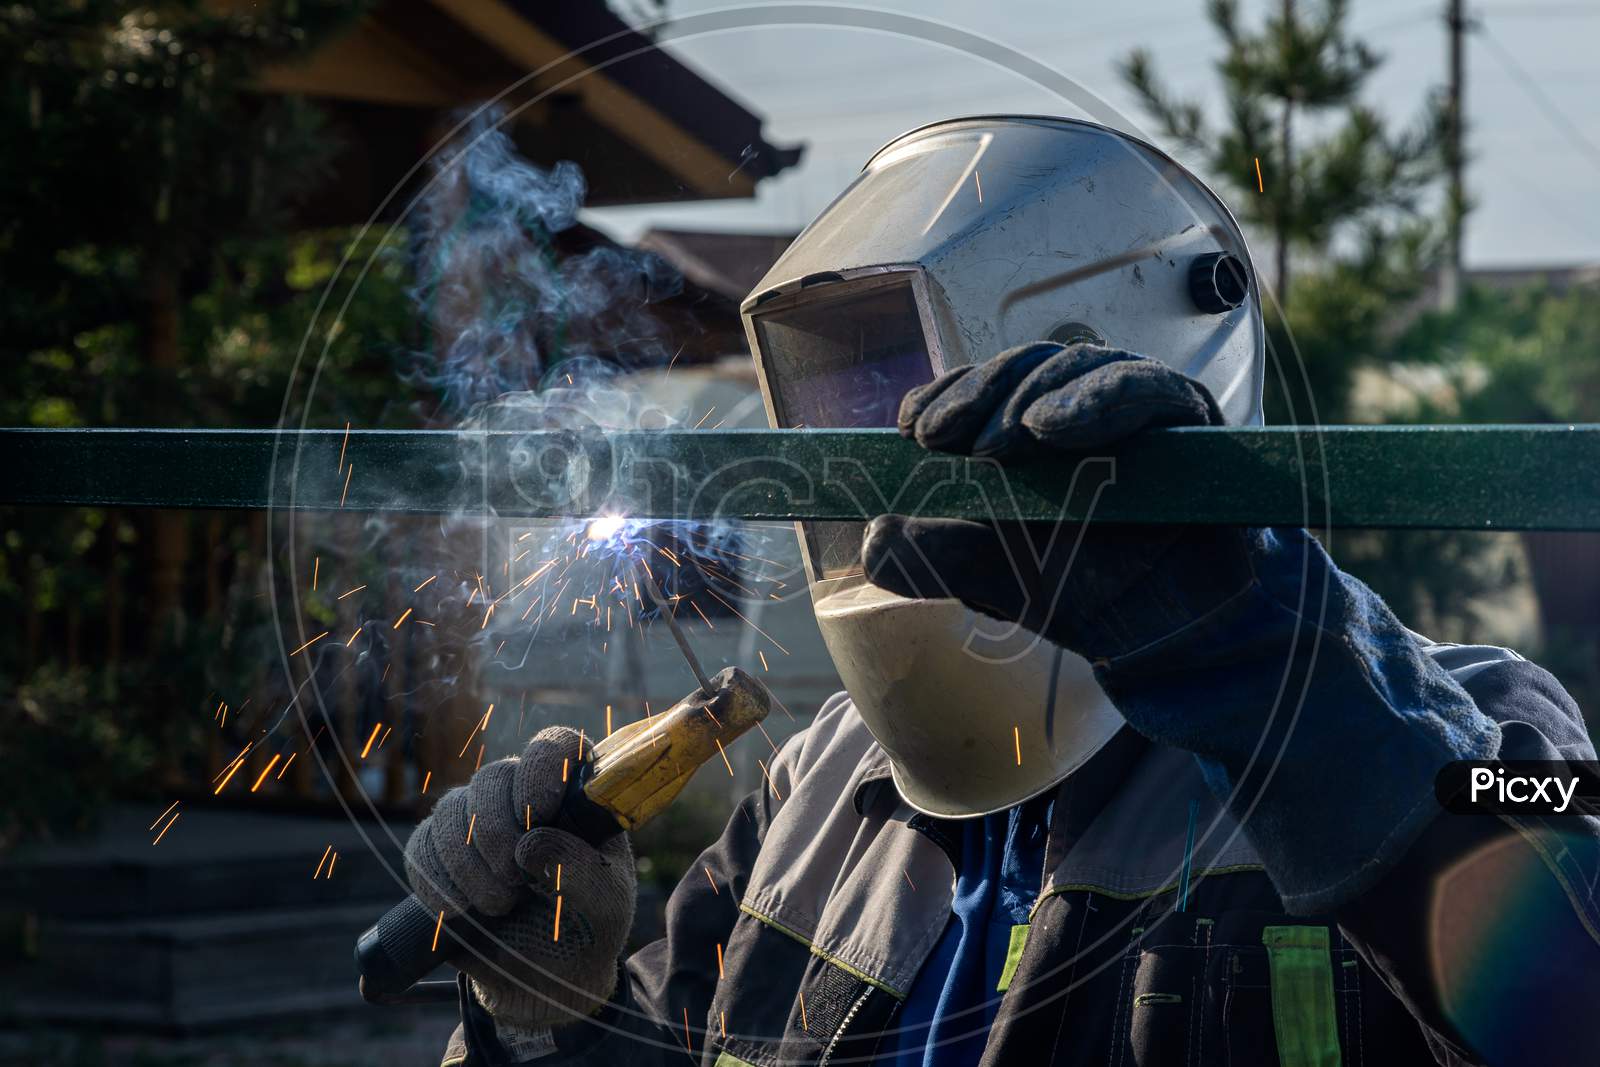 A Strong Man Is A Welder In A Welding Mask And Welders Leathers, A Metal Product Is Welded With A Welding Machine In The Outside,  Blue Sparks Fly To The Sides